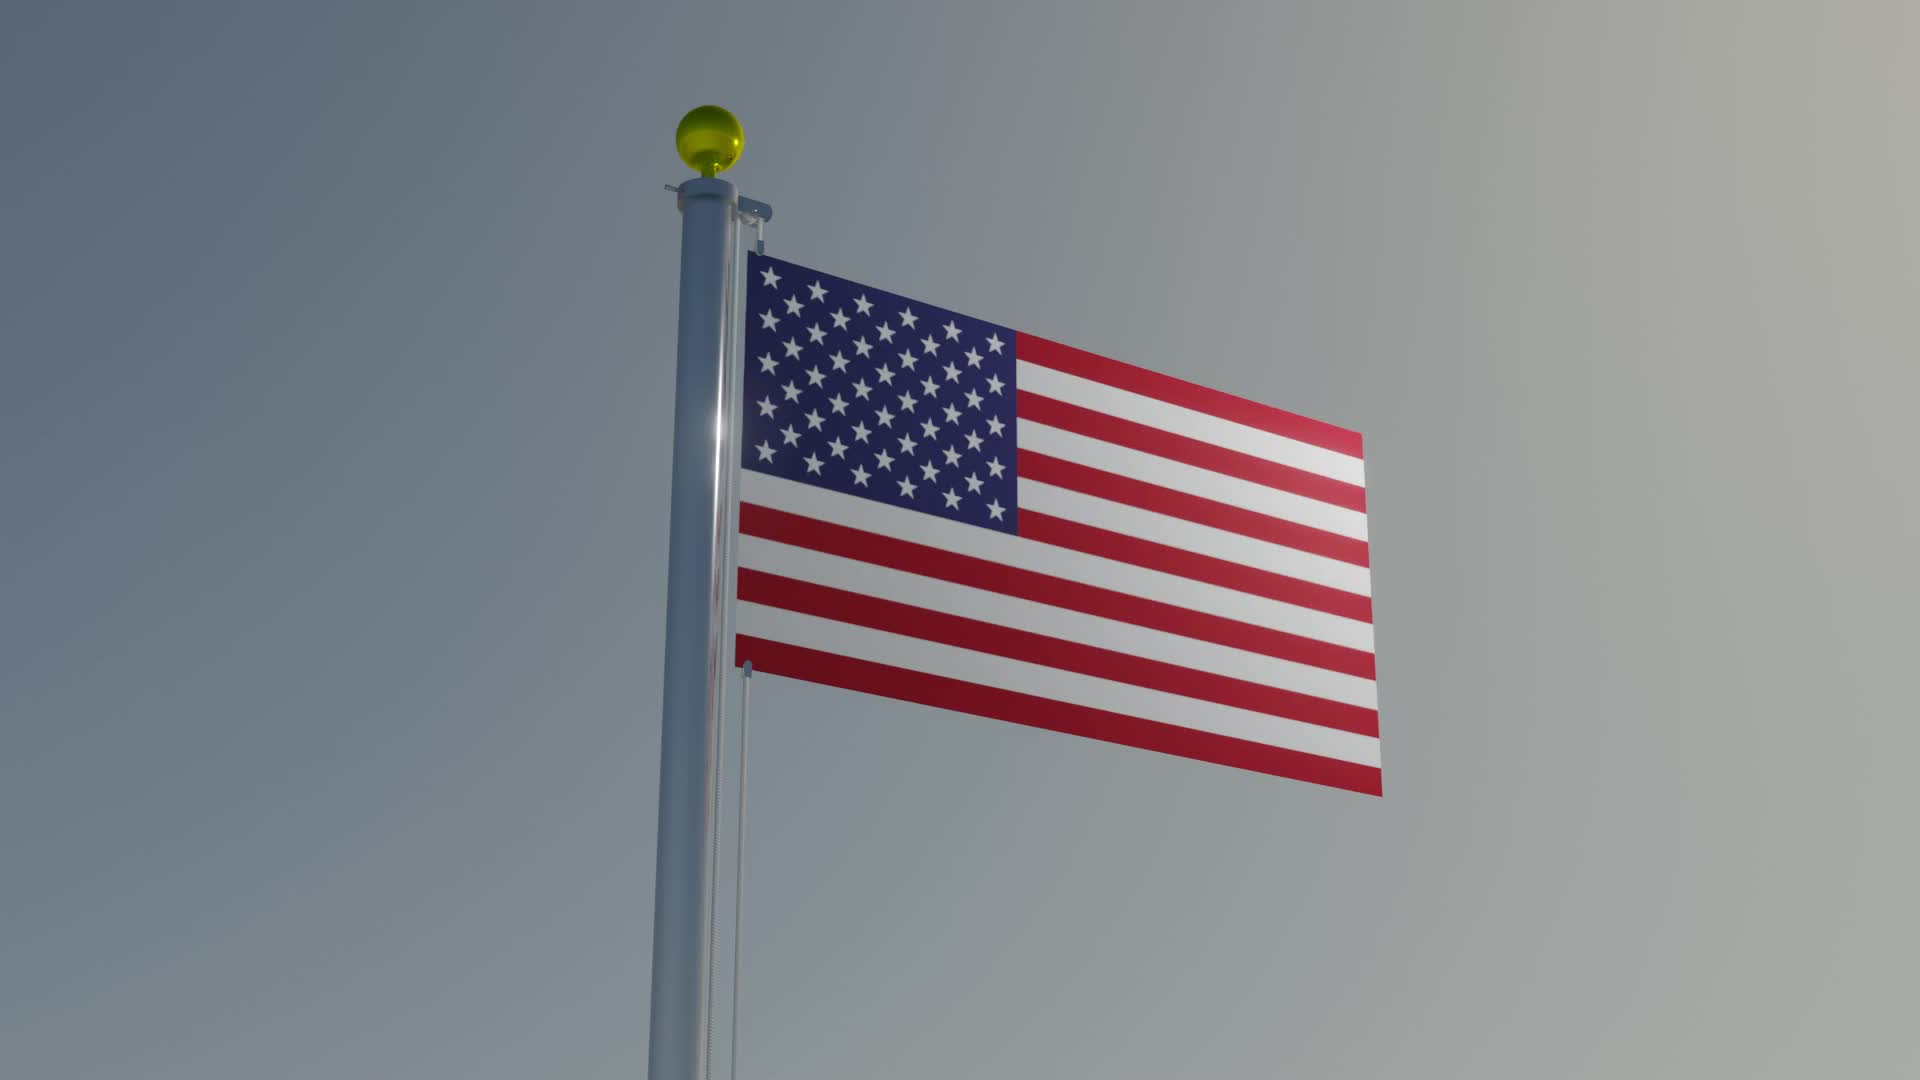 animated american flag waving in the wind